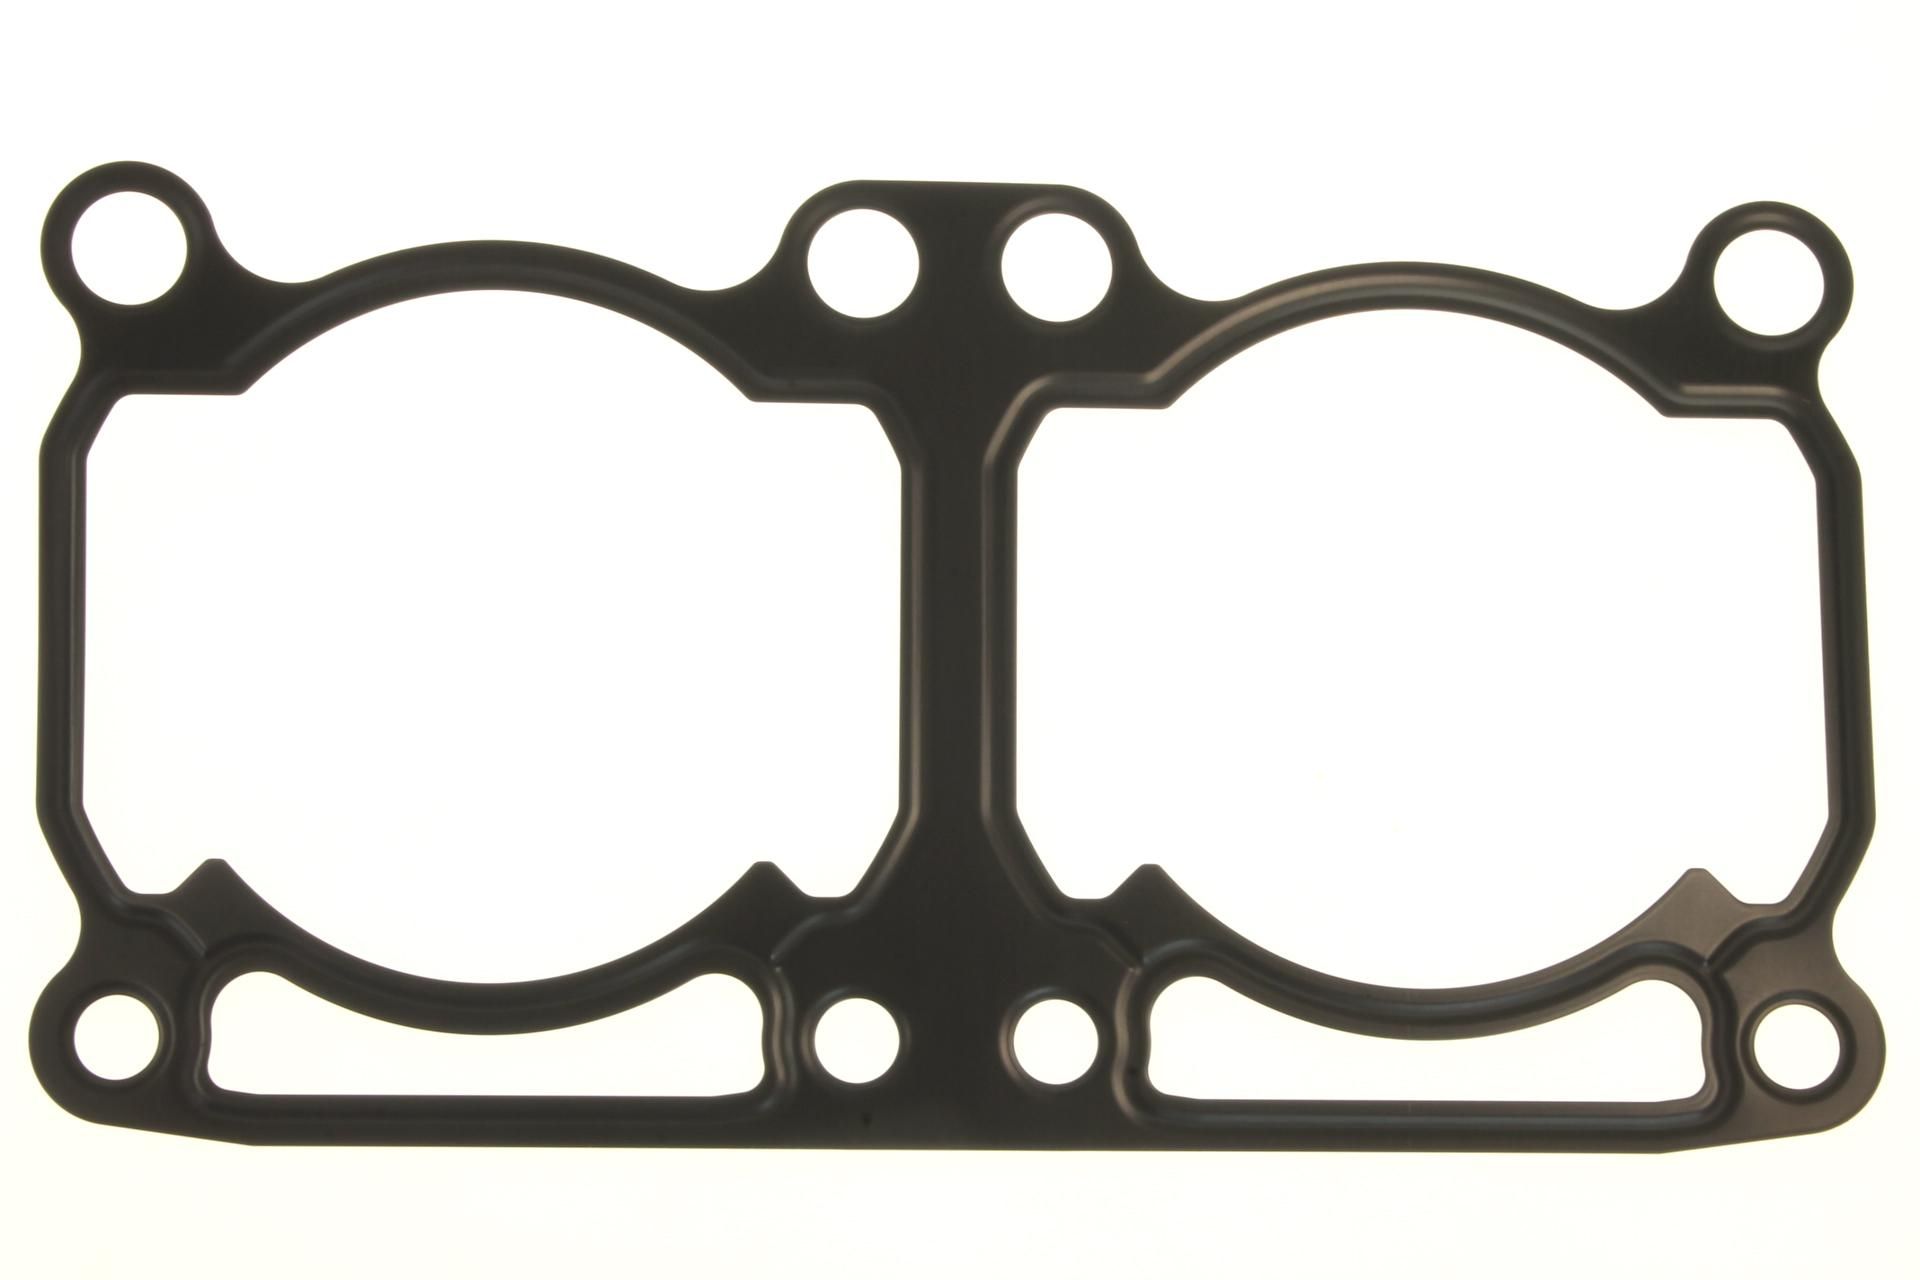 8AB-11351-00-00 Superseded by 8CR-11351-00-00 - GASKET,CYLINDER